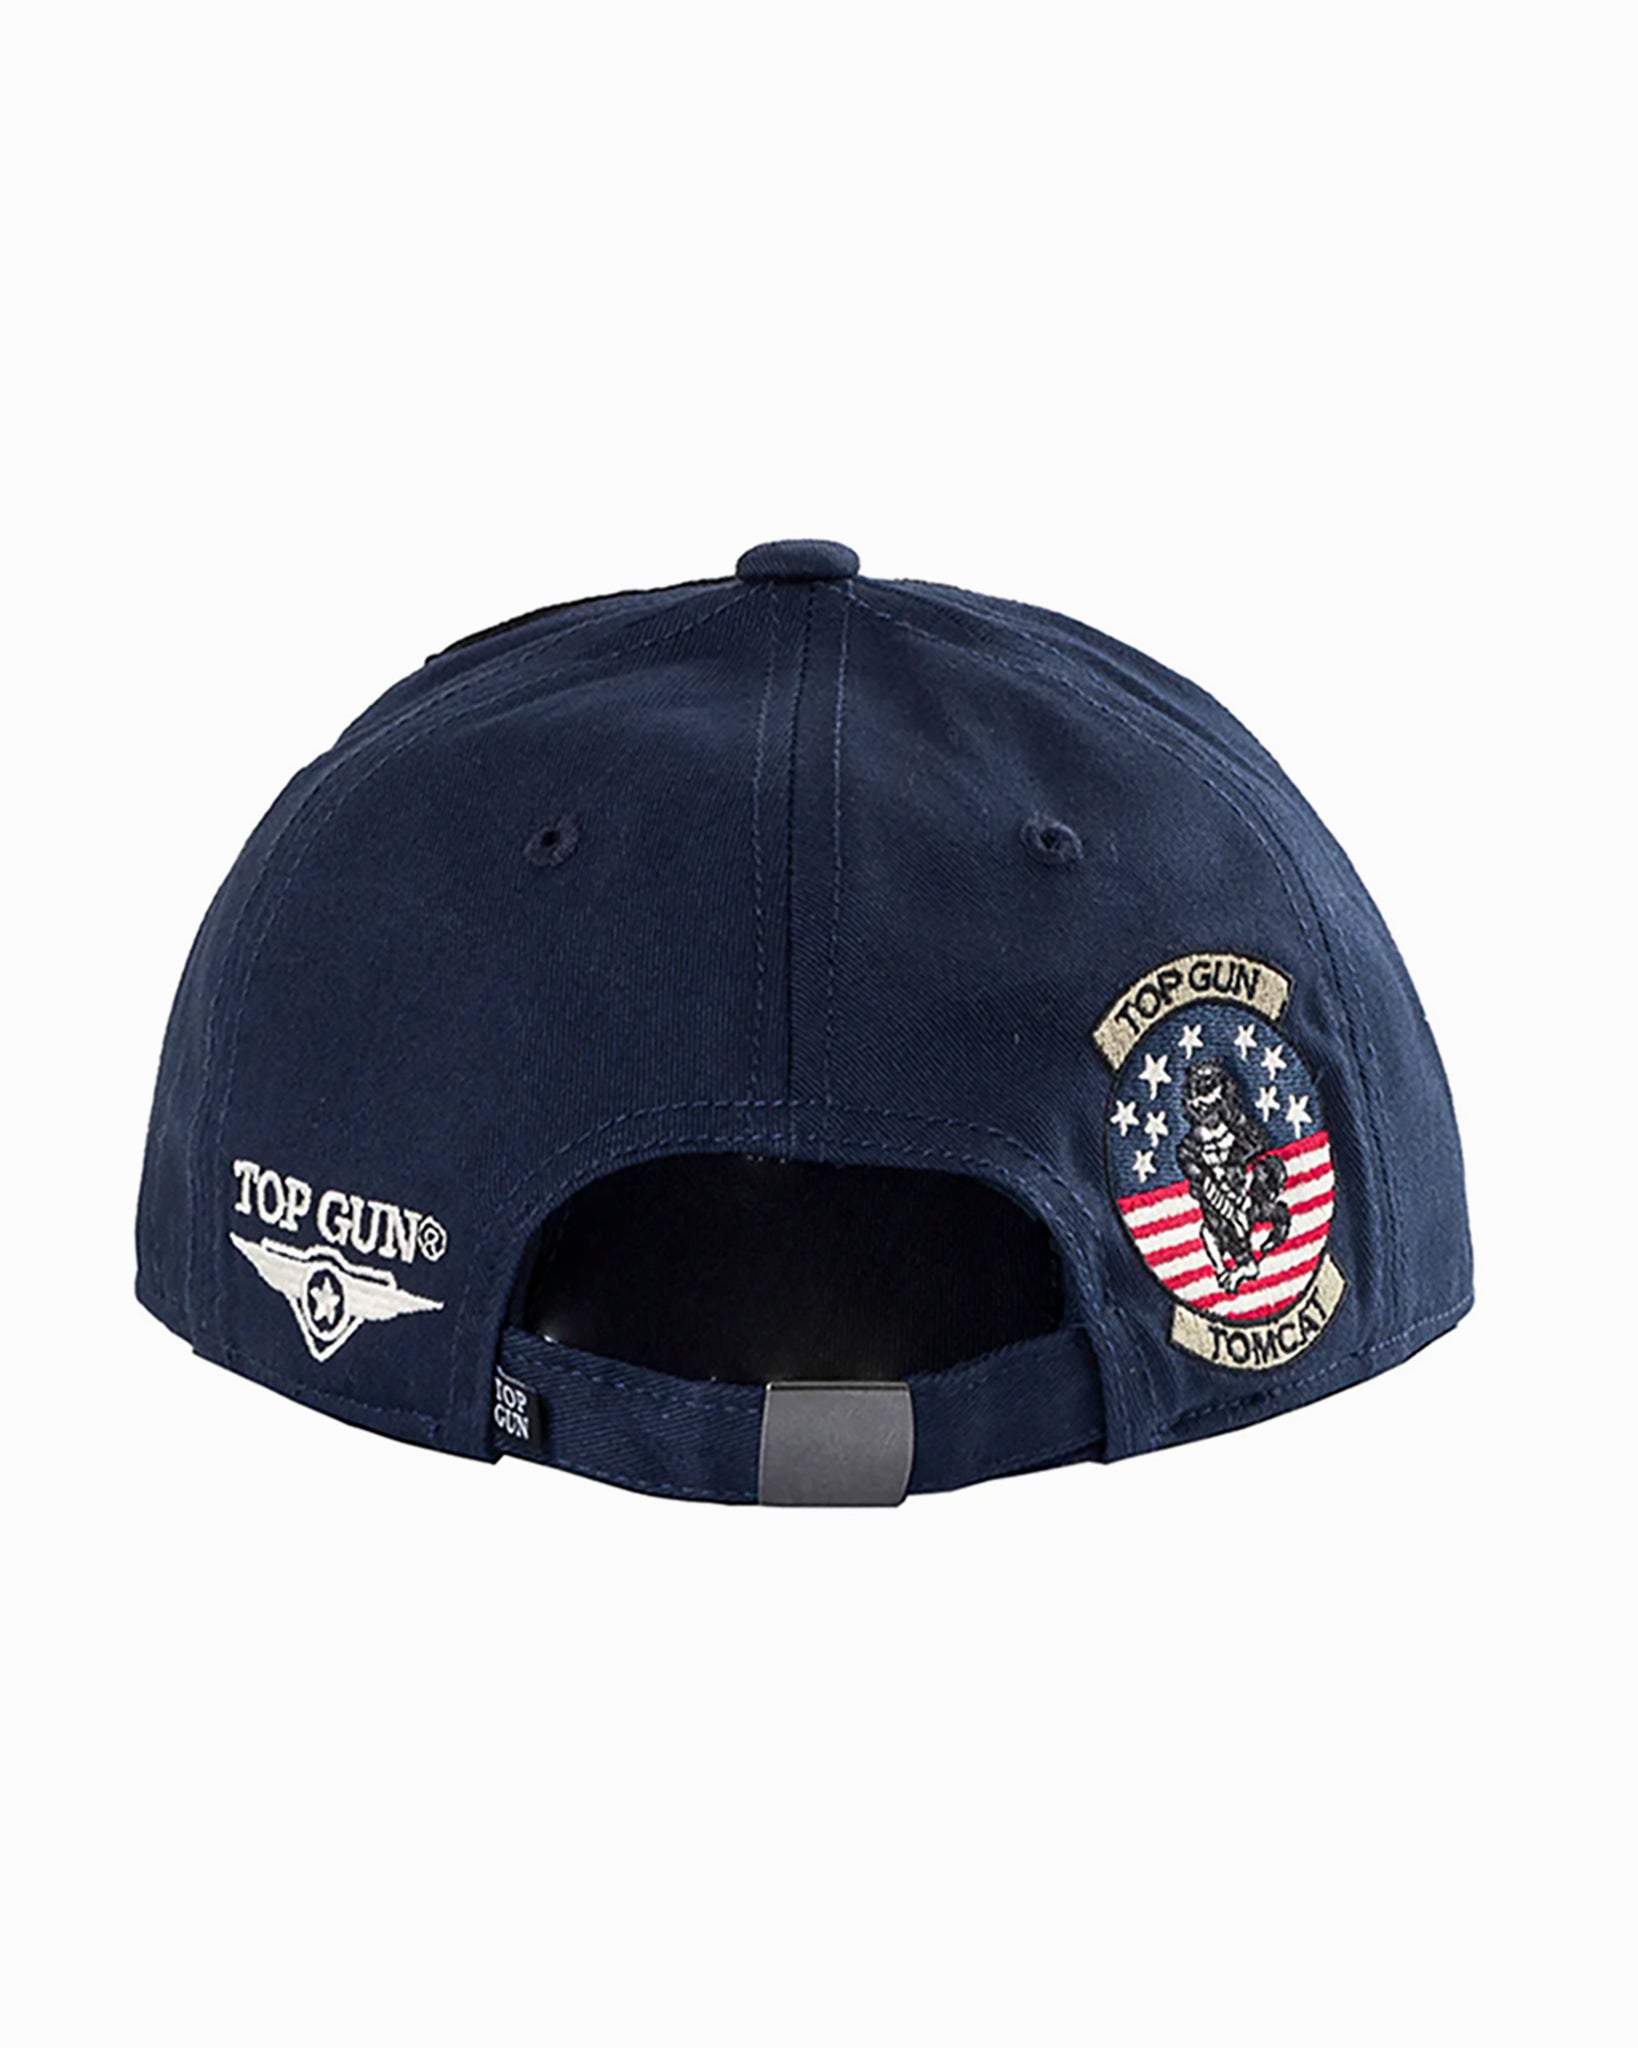 TOP GUN® CAP WITH PATCHES-Navy-Back